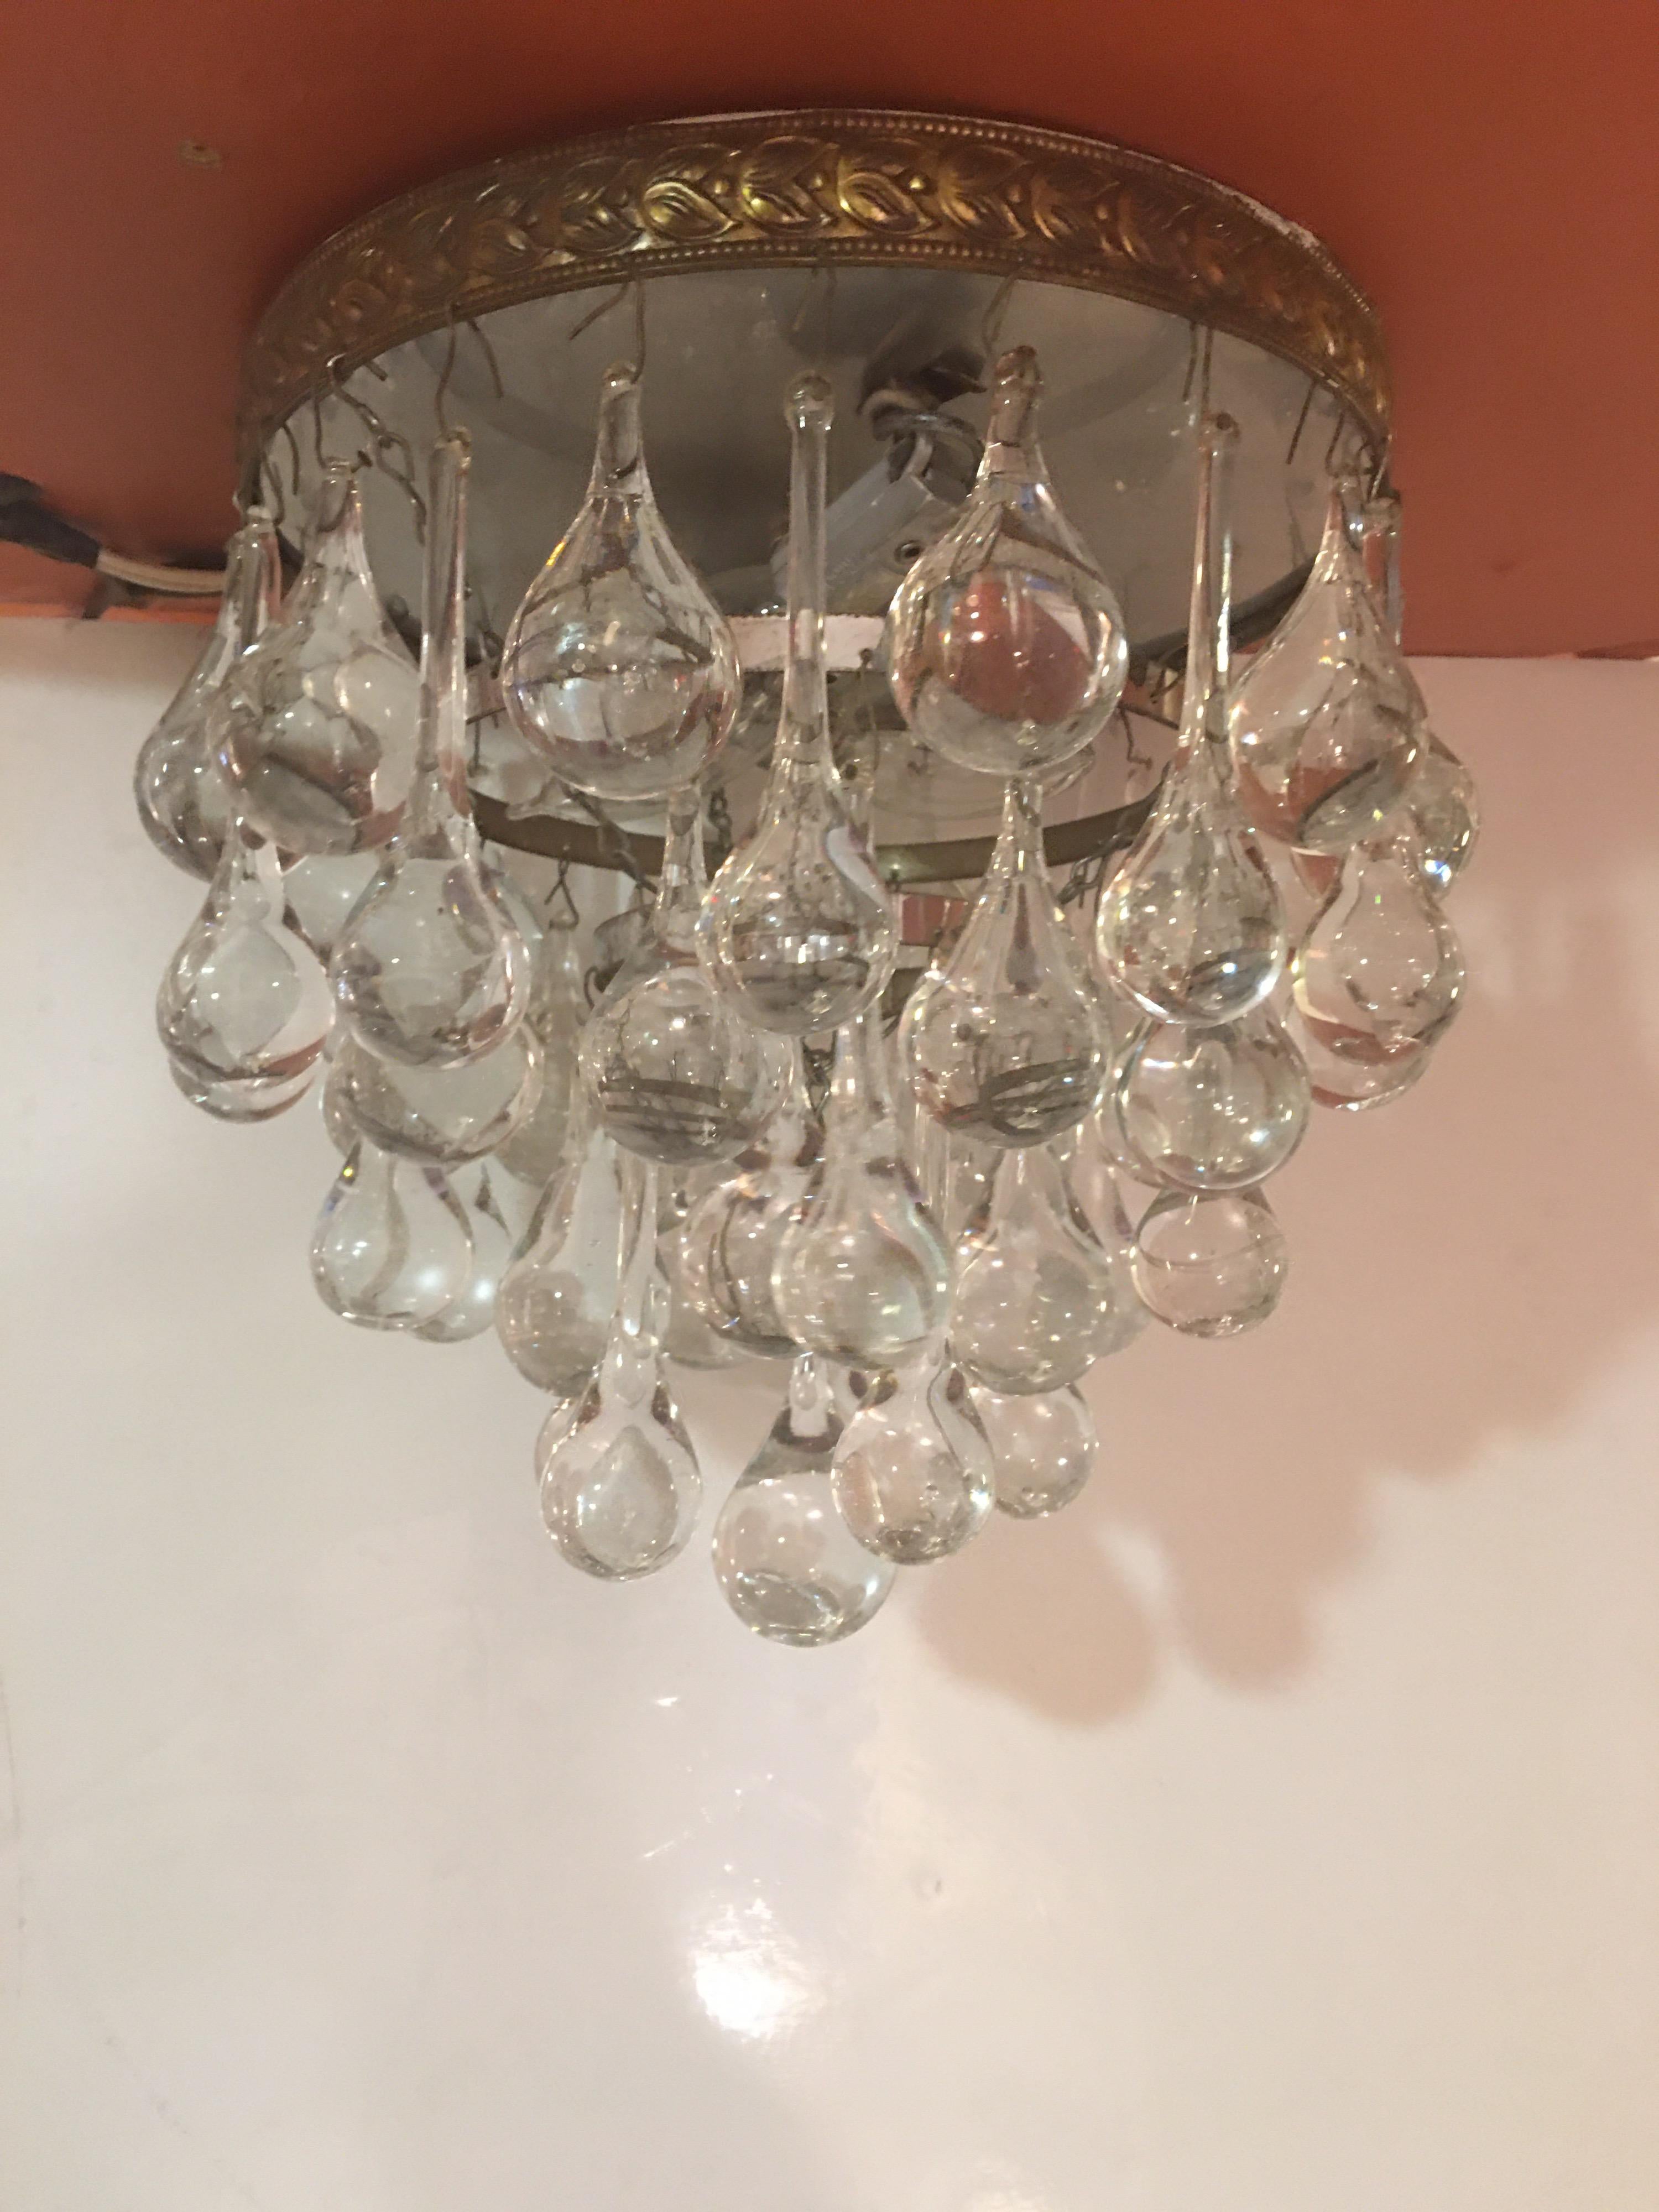 Tear drop ceiling fixture, 2 available! Flush mounted, perfect for an entrance or hallway. Brass trim around top. Alternating tear-drop crystals in 2 sizes.